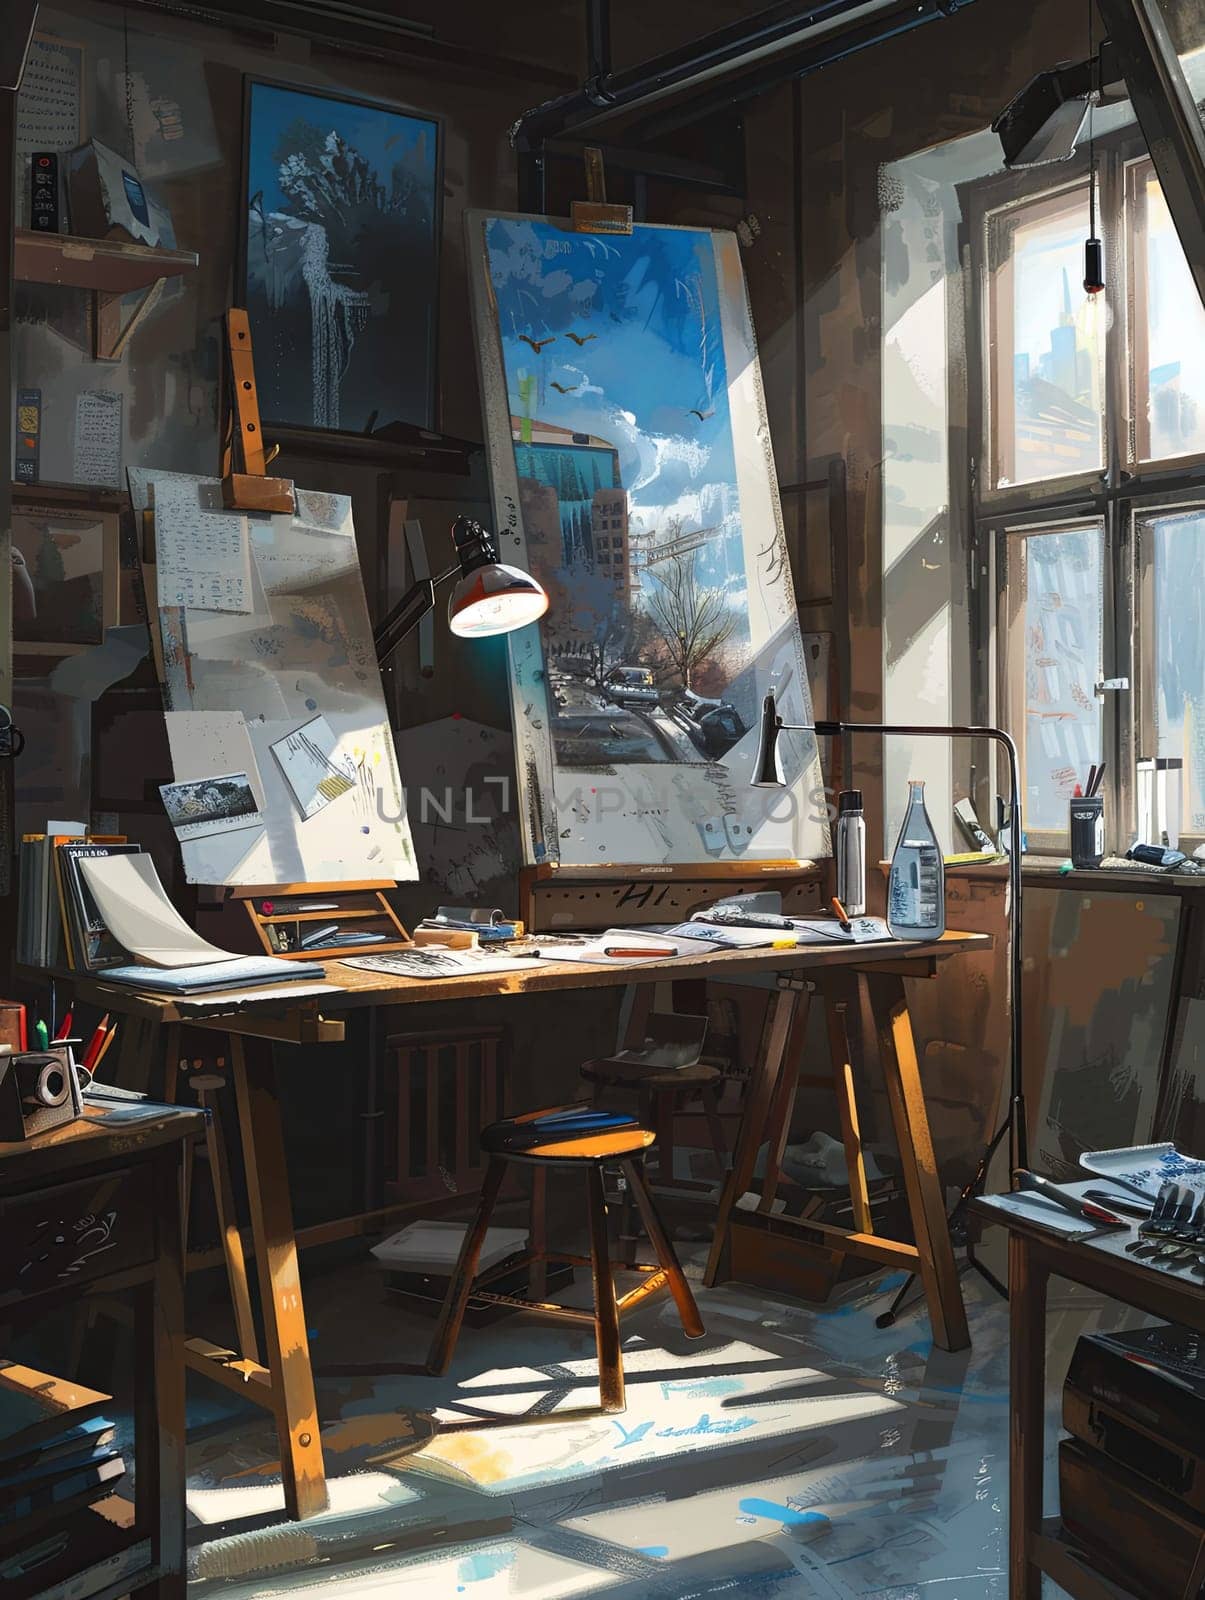 An artists studio filled with modern technology and sunlight. Digital canvases and smart brushes aid in the creative process.